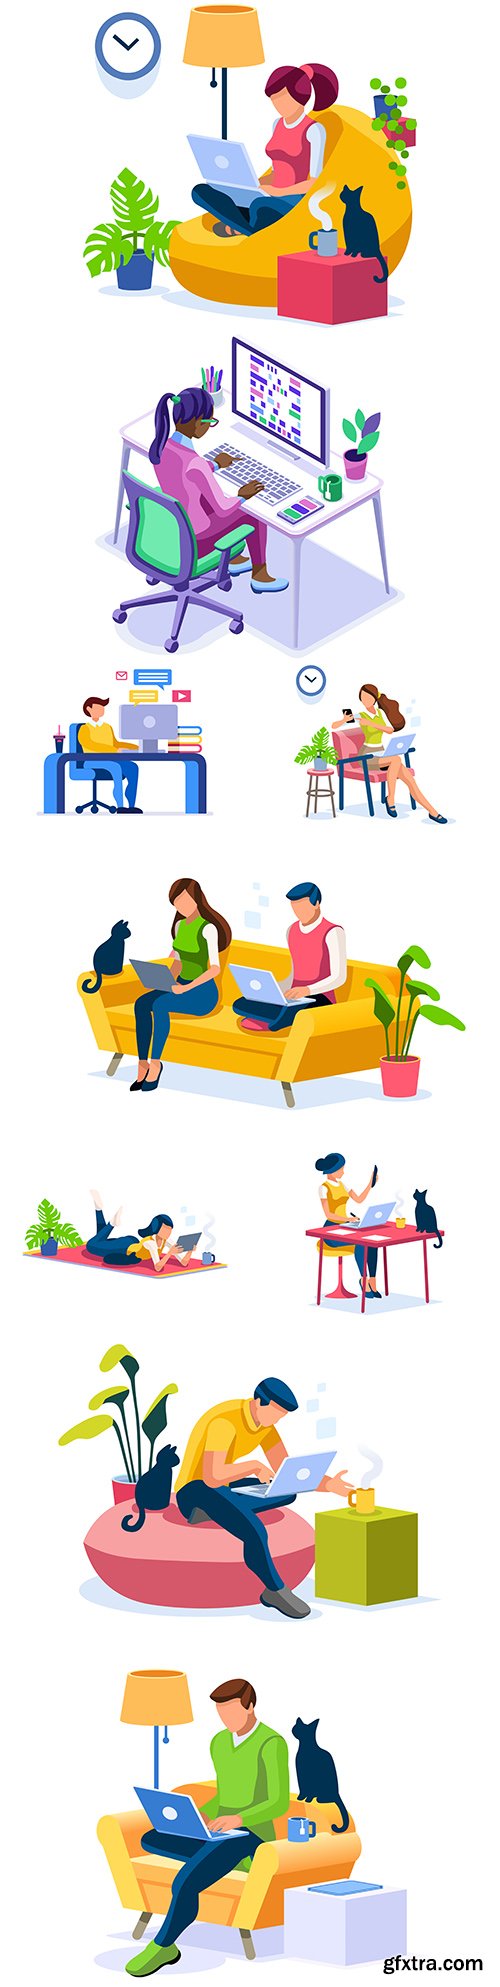 Stay at home people work at home design isometric illustrations
